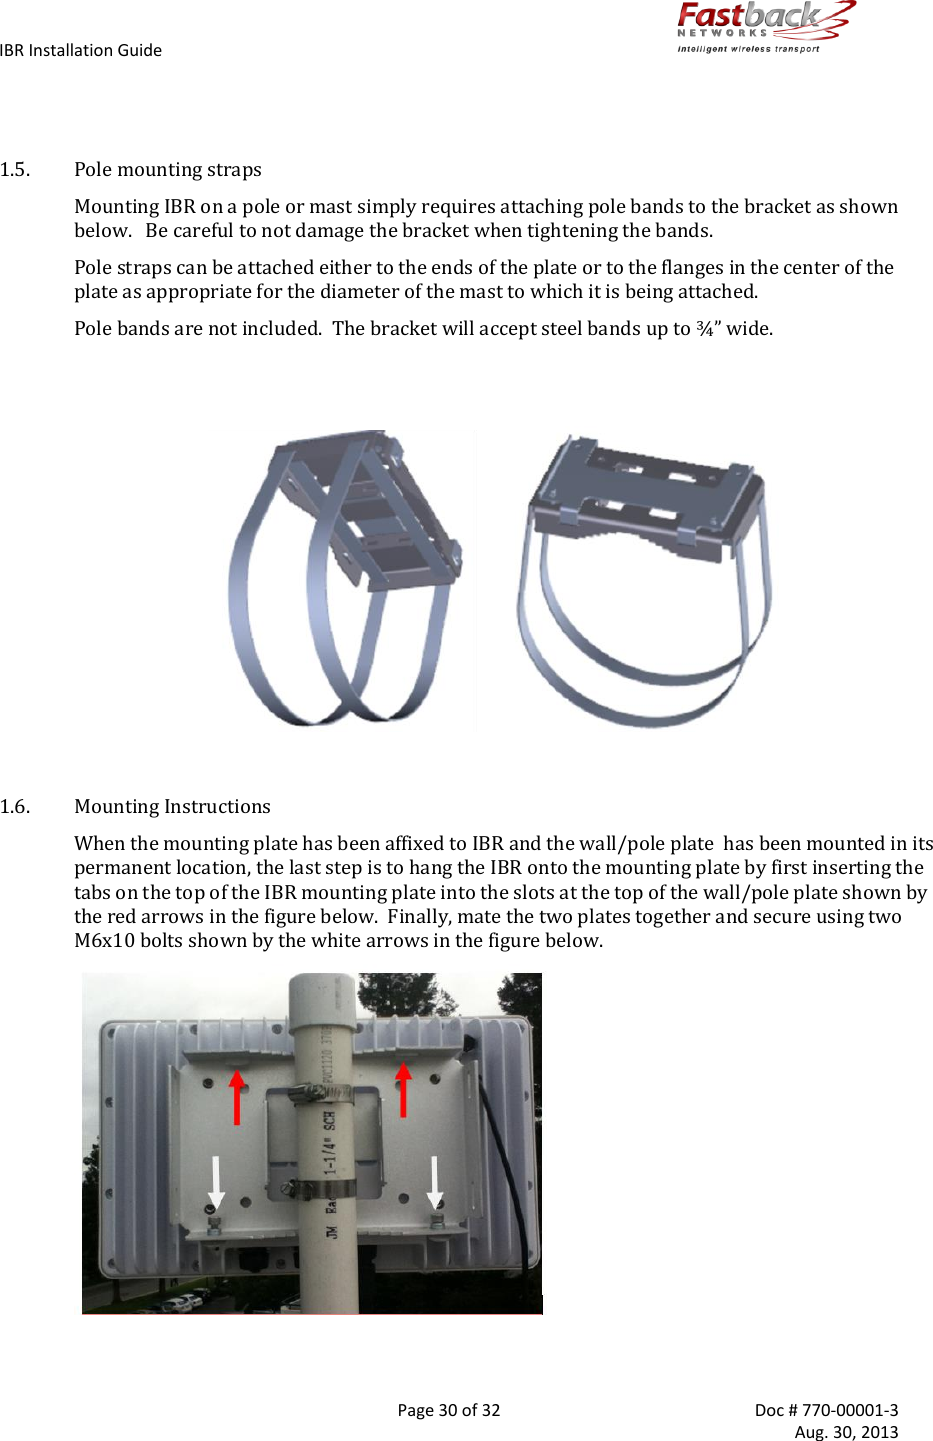 IBR Installation Guide        Page 30 of 32  Doc # 770-00001-3     Aug. 30, 2013     1.5. Pole mounting straps Mounting IBR on a pole or mast simply requires attaching pole bands to the bracket as shown below.   Be careful to not damage the bracket when tightening the bands. Pole straps can be attached either to the ends of the plate or to the flanges in the center of the plate as appropriate for the diameter of the mast to which it is being attached. Pole bands are not included.  The bracket will accept steel bands up to ¾” wide.                                         1.6. Mounting Instructions When the mounting plate has been affixed to IBR and the wall/pole plate  has been mounted in its permanent location, the last step is to hang the IBR onto the mounting plate by first inserting the tabs on the top of the IBR mounting plate into the slots at the top of the wall/pole plate shown by the red arrows in the figure below.  Finally, mate the two plates together and secure using two M6x10 bolts shown by the white arrows in the figure below.    